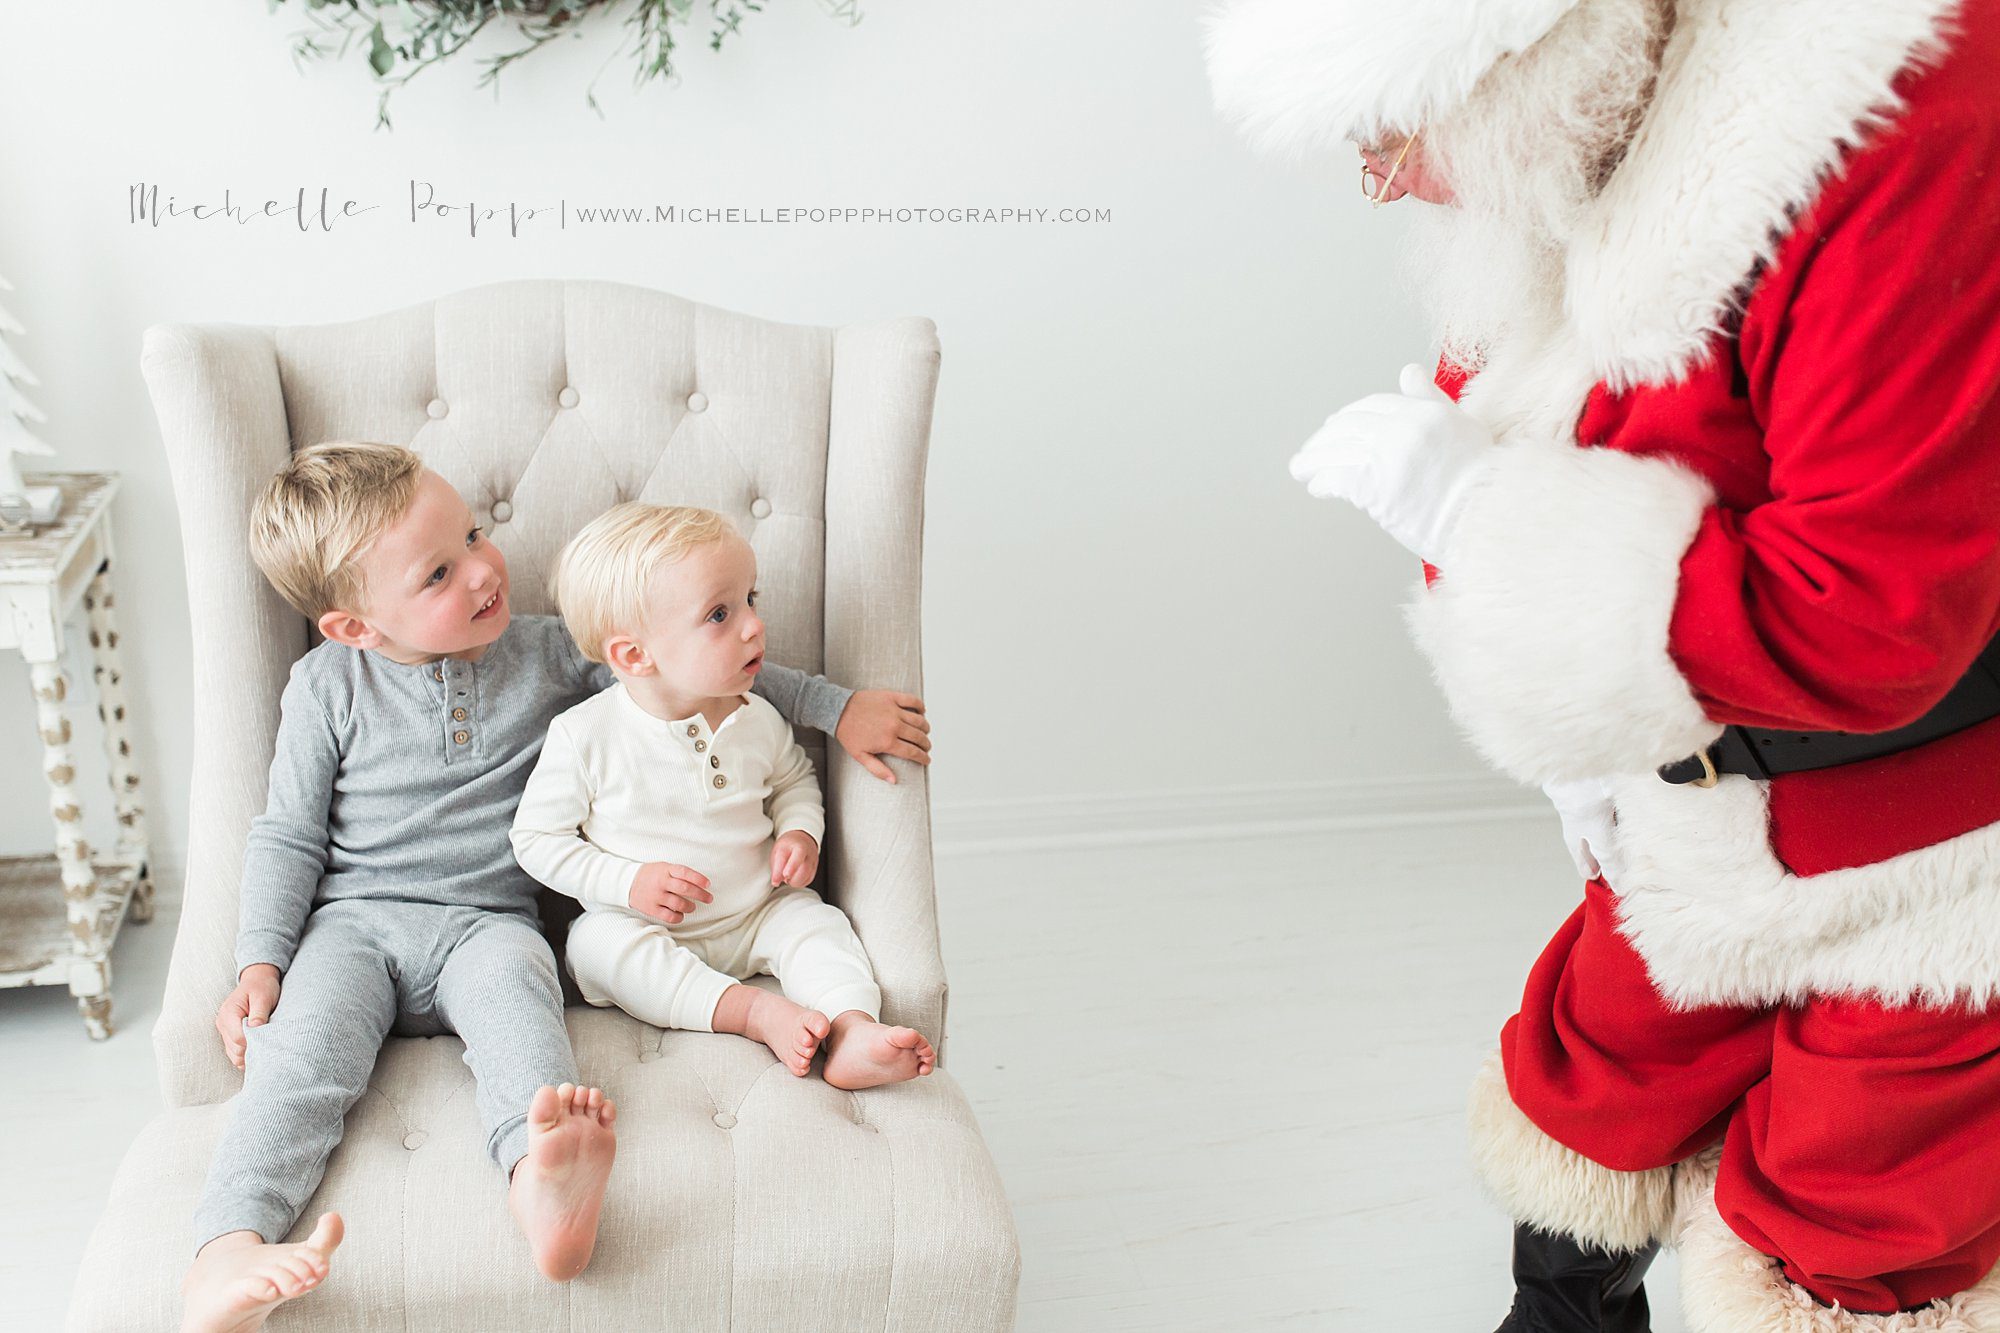 Santa waving to two little boys sitting on chair